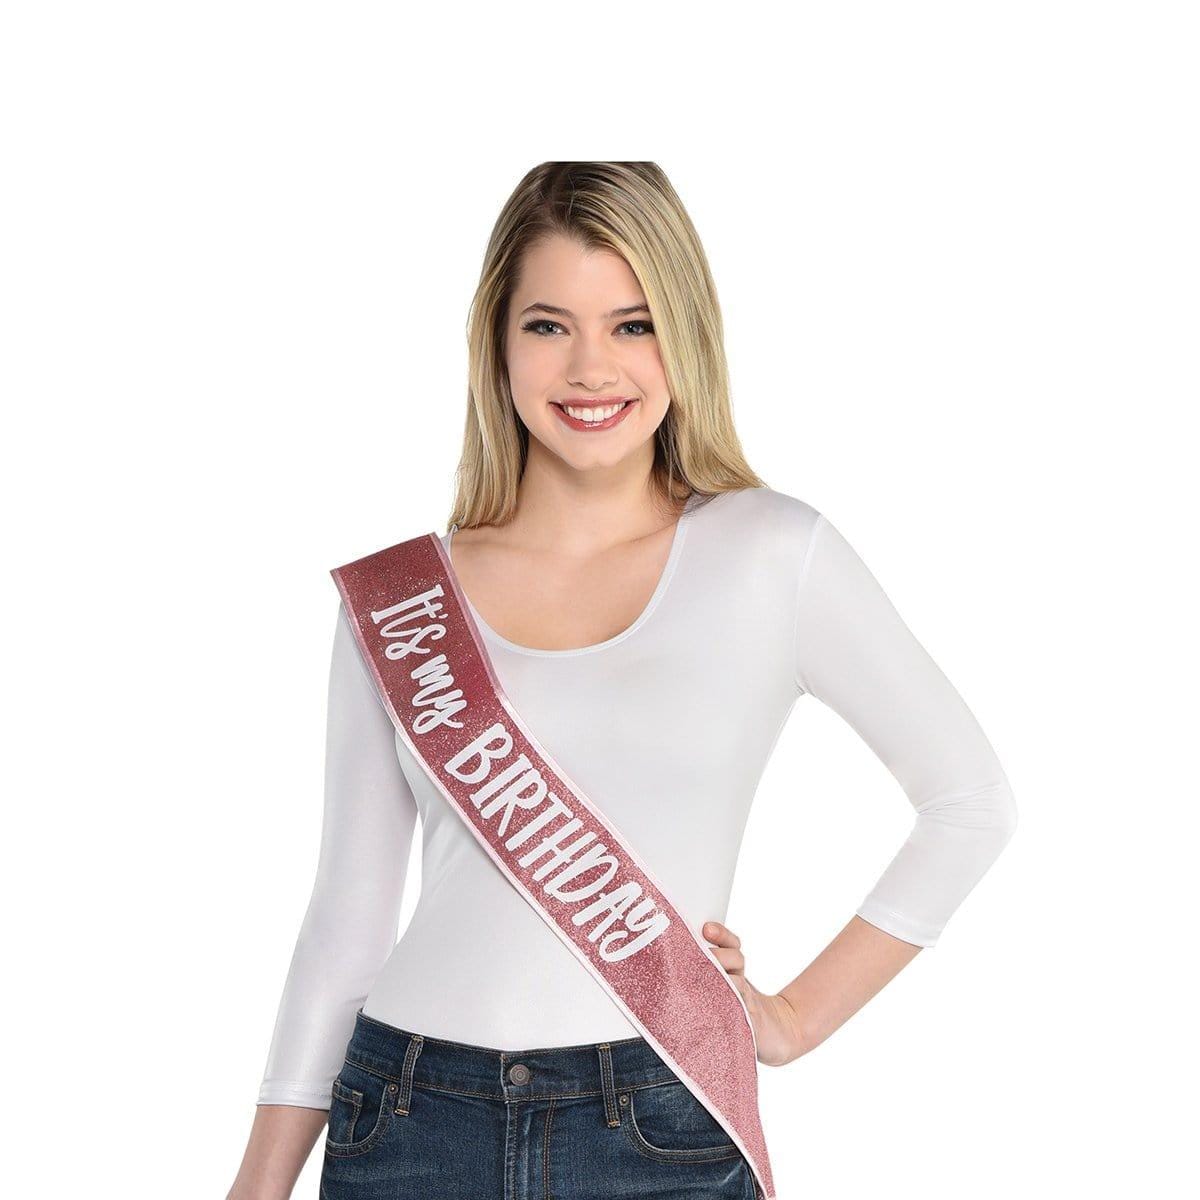 Buy General Birthday Blush Birthday - Deluxe Sash sold at Party Expert